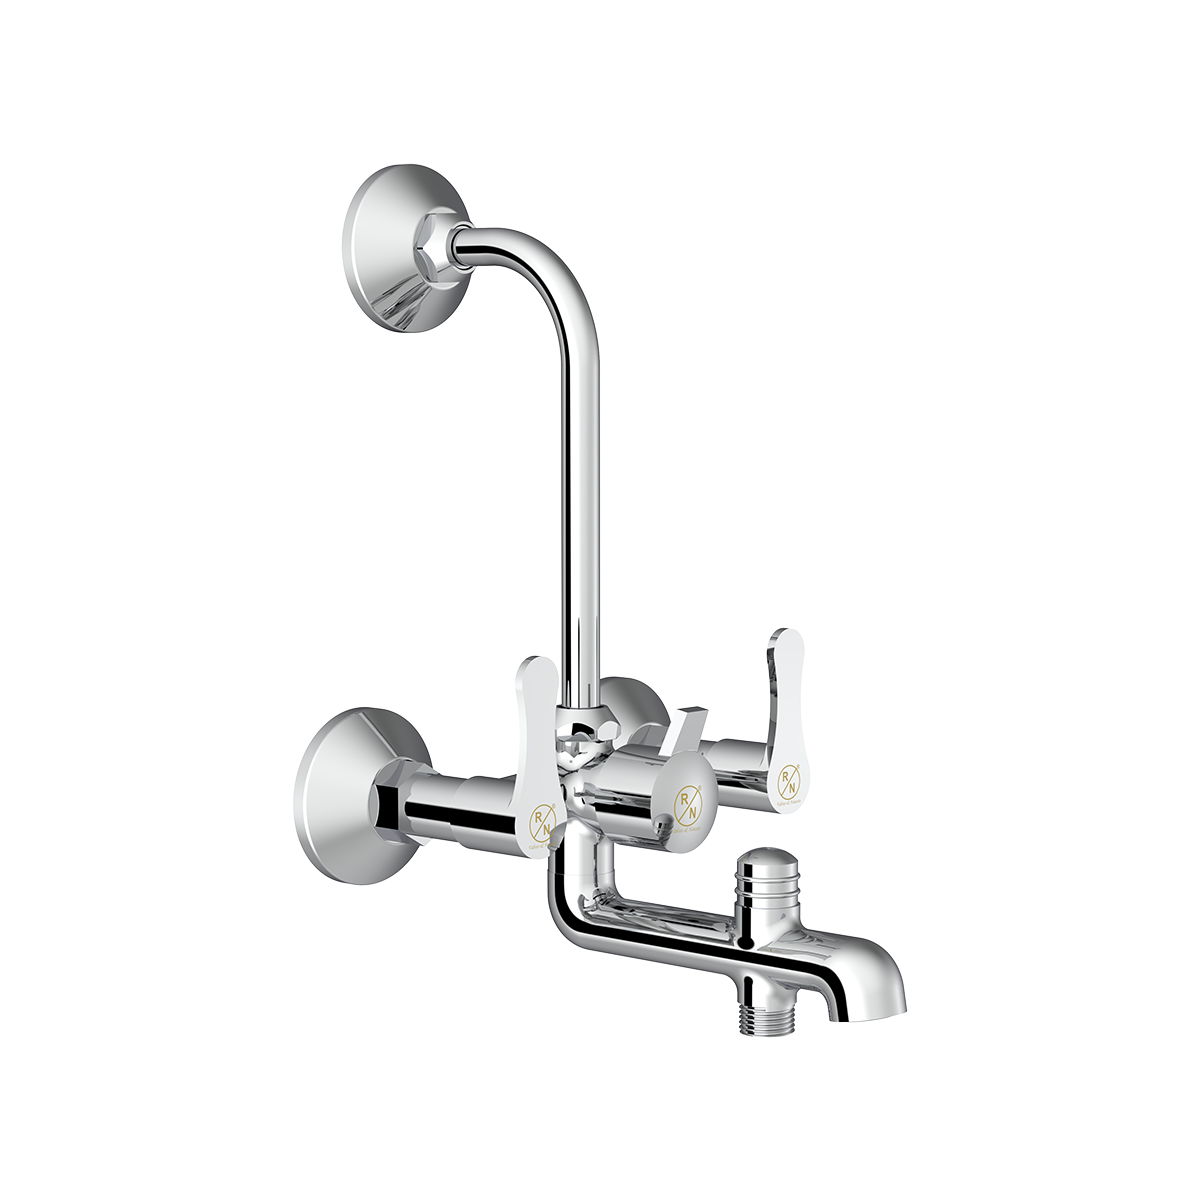 3 In 1 Wall Mixer With Provision For Both Overhead & Hand Shower With L-Bend